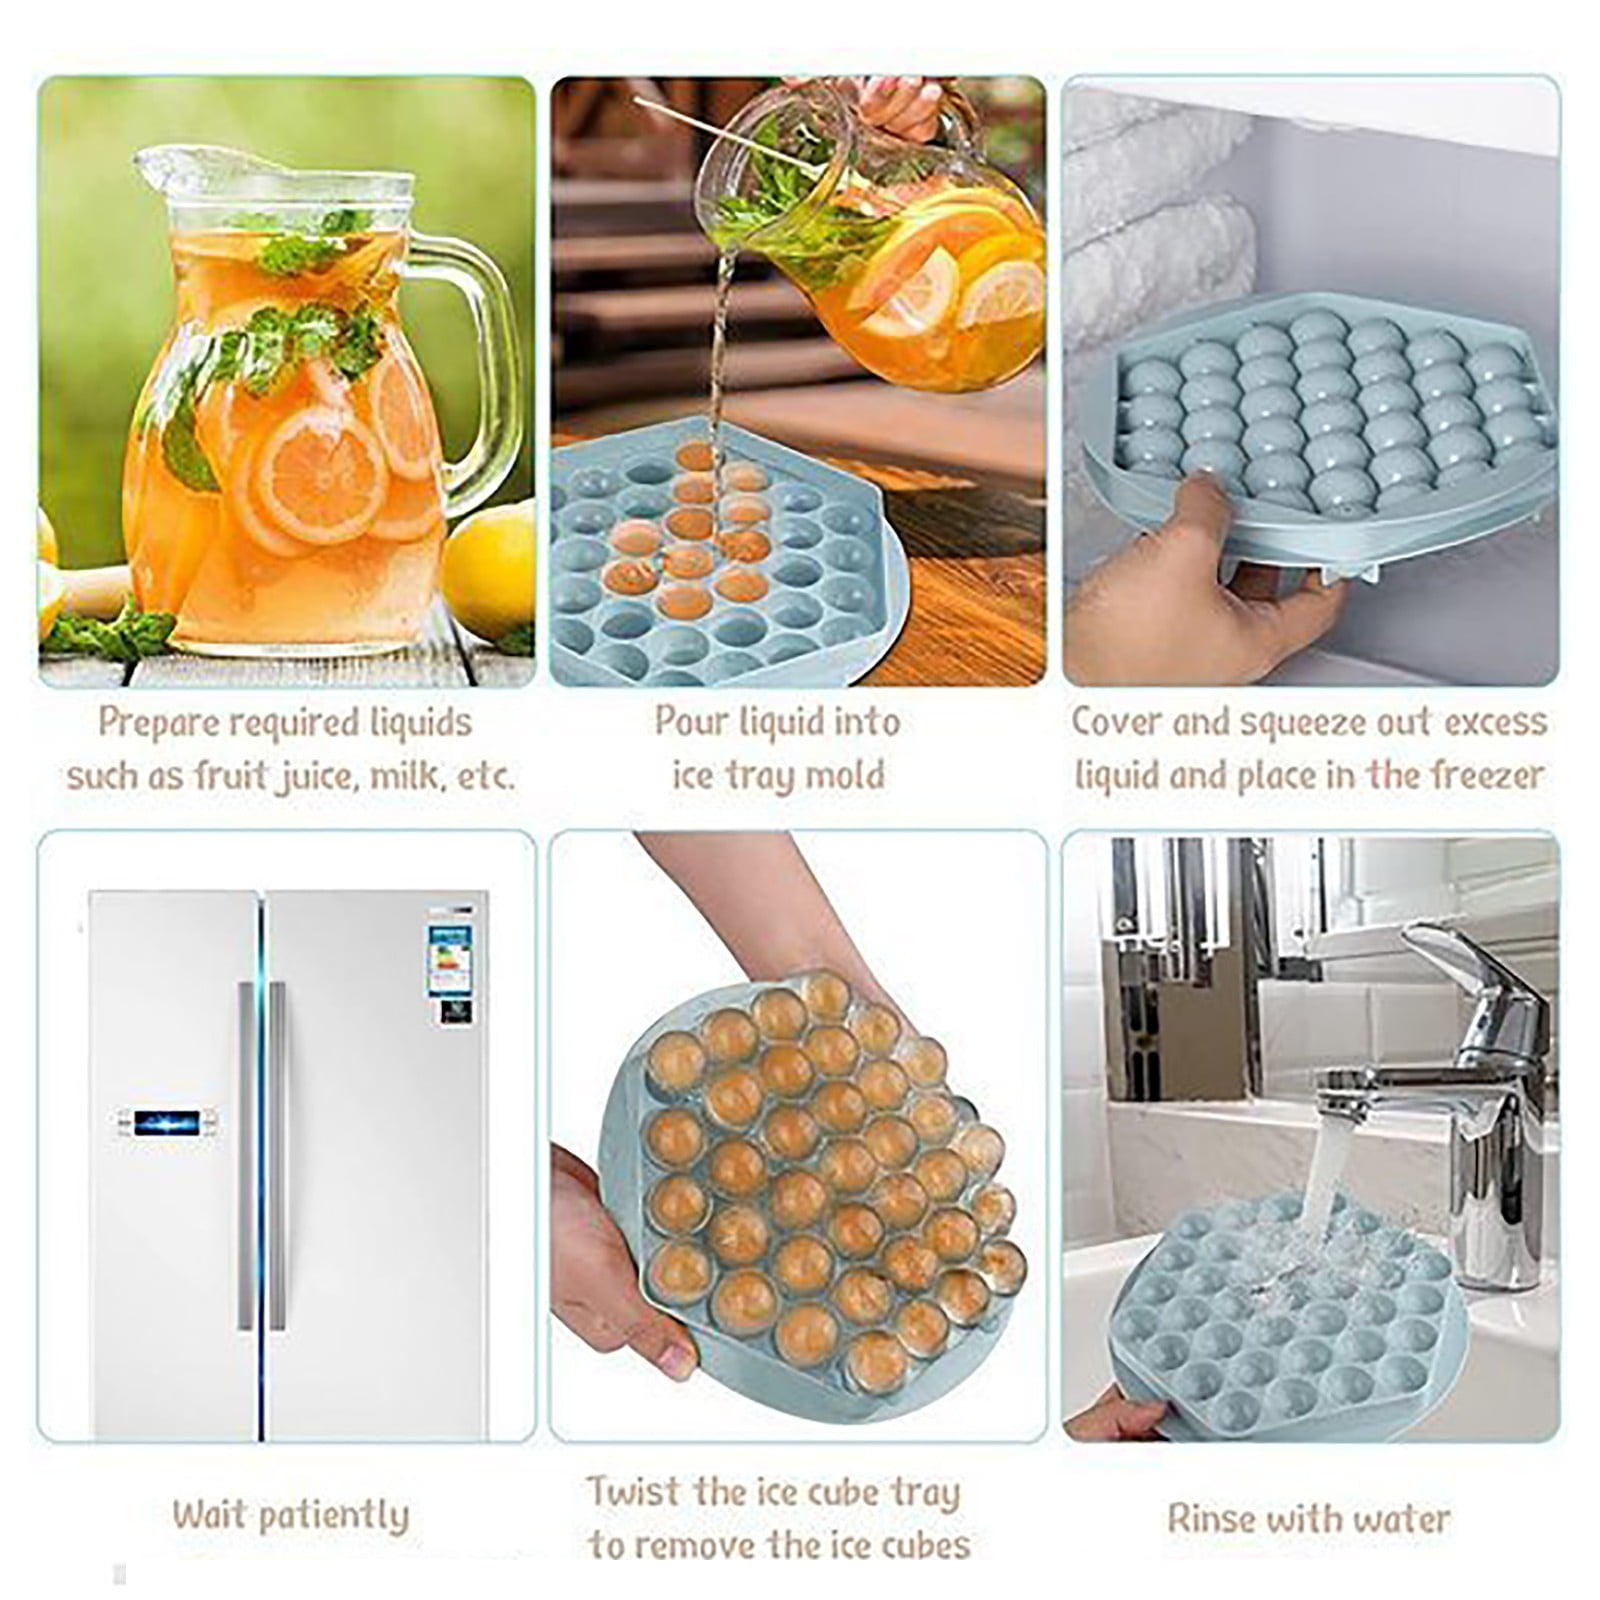 Dropship 1pc; Hexagon Round Ice Cube Tray With Lid; Mini Circle Ice Ball  Maker Mold For Freezer; 37pcs Sphere Ice Chilling Cocktail Whiskey Tea &  Coffee to Sell Online at a Lower